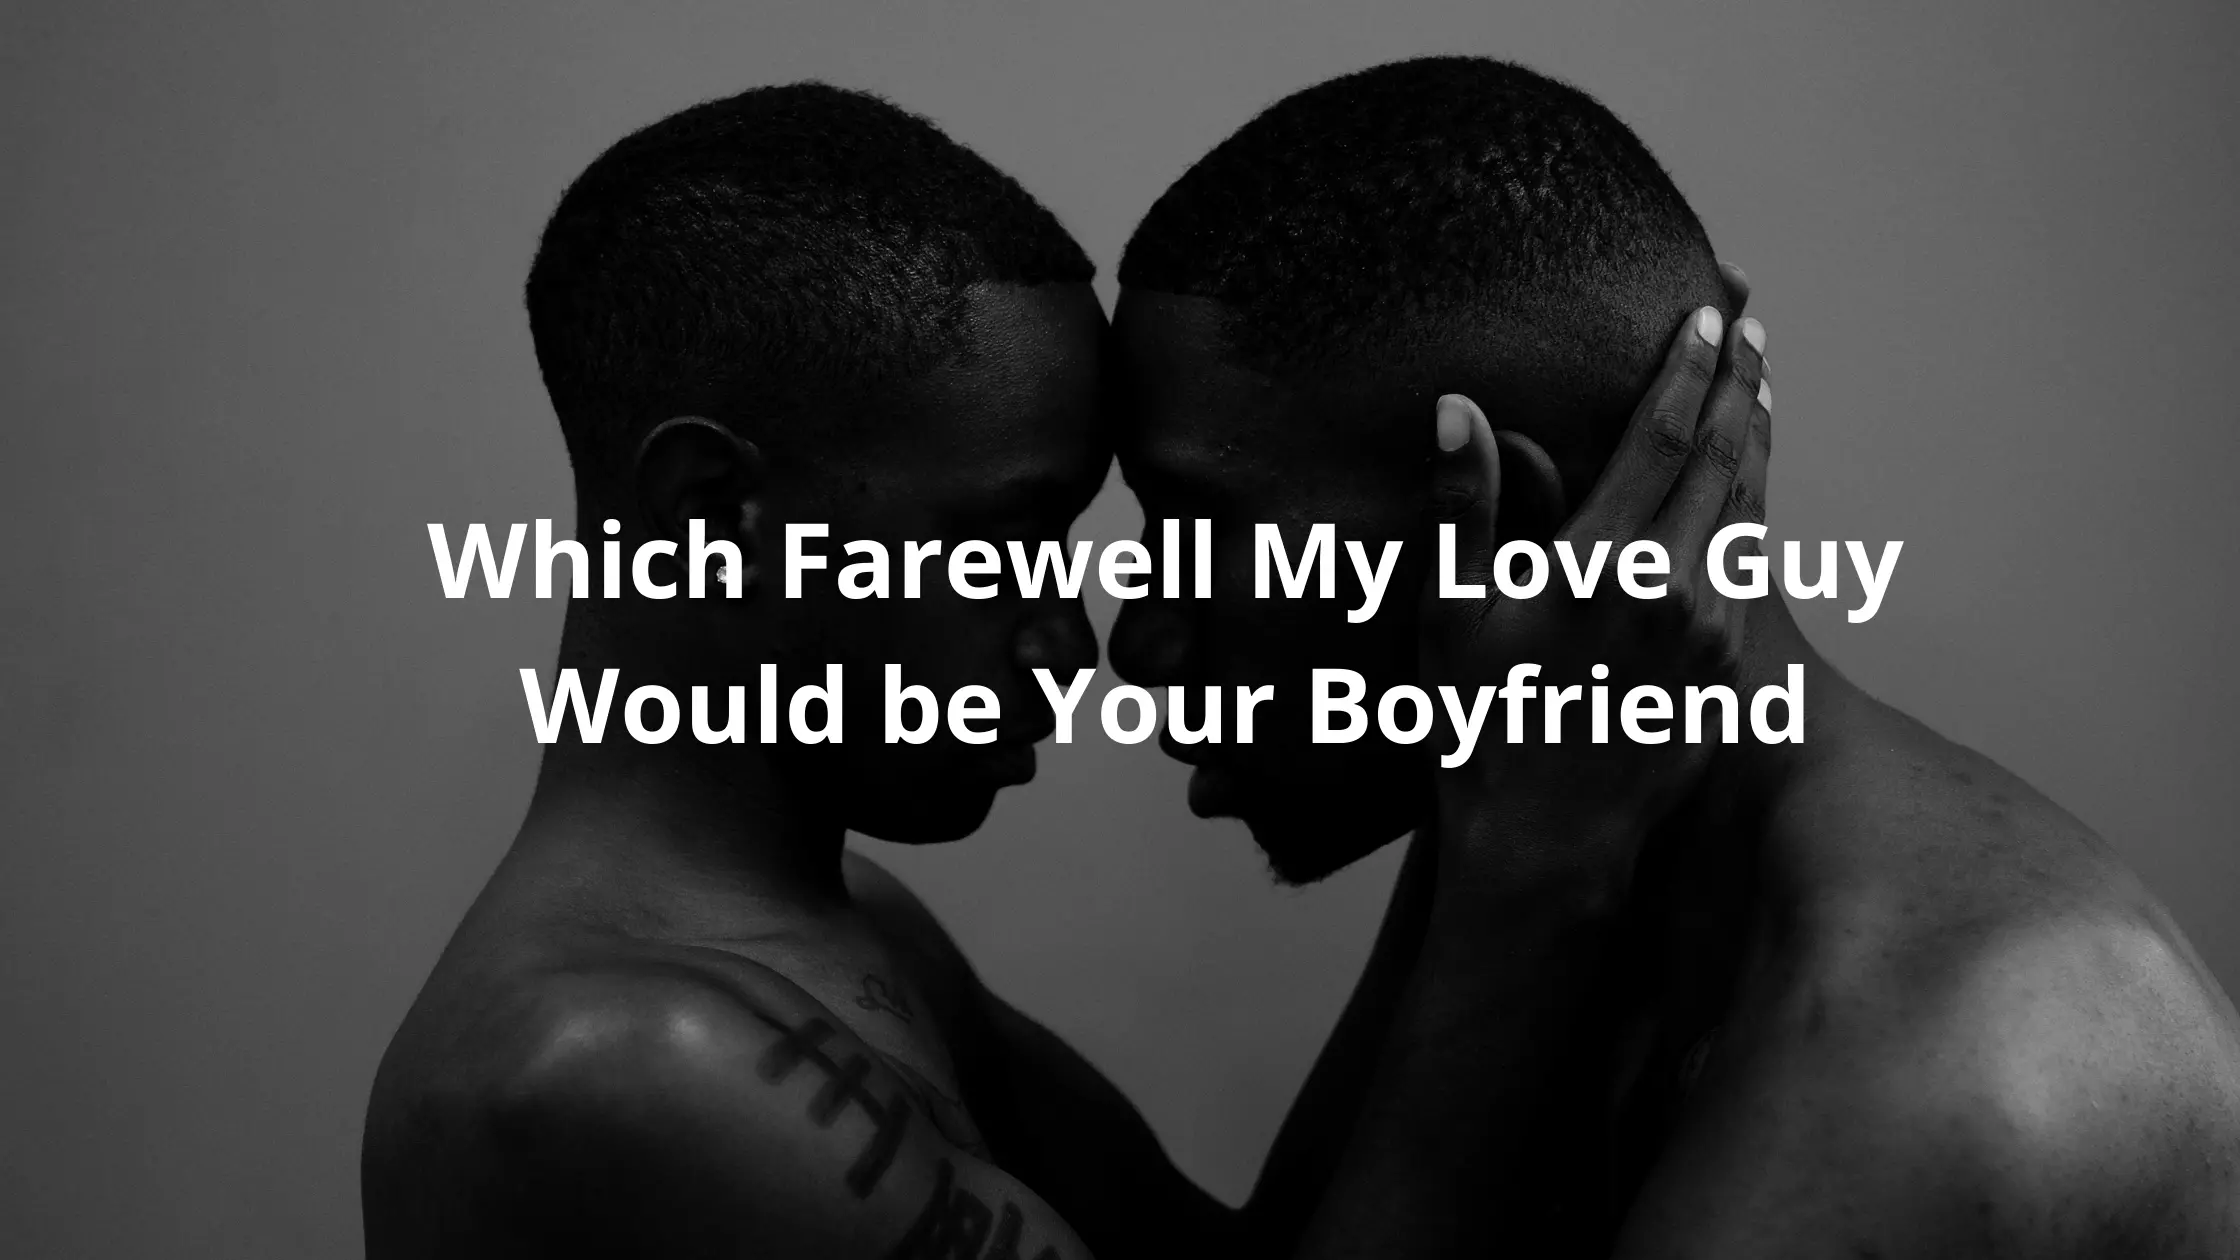 Which Farewell My Love Guy Would be Your Boyfriend